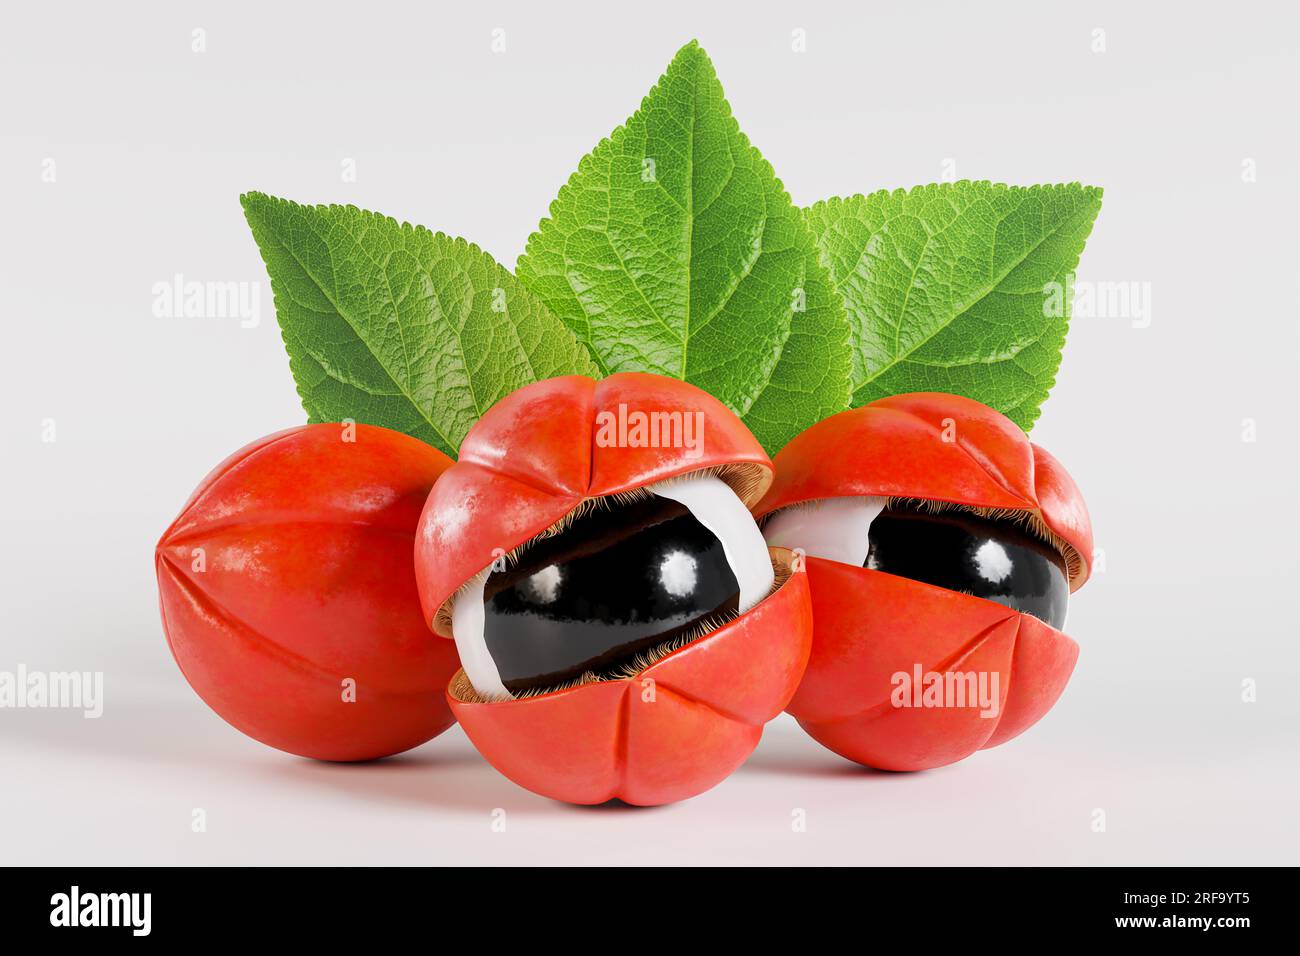 Guarana with leaves, exotic fruit from the Amazon Stock Photo